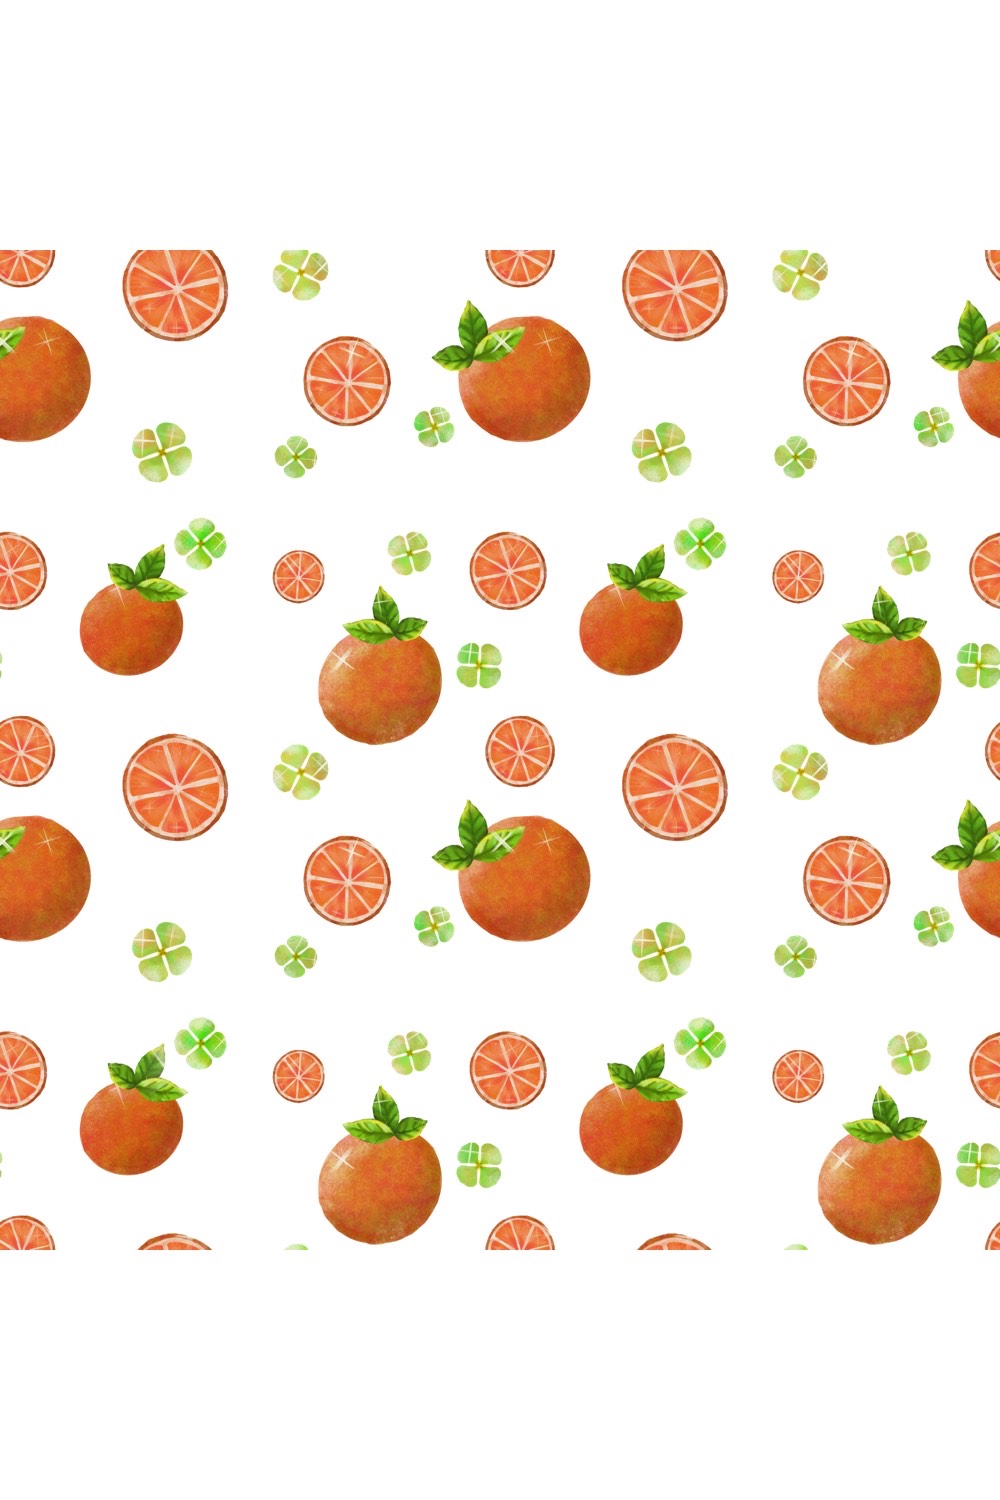 Pattern with oranges pinterest preview image.